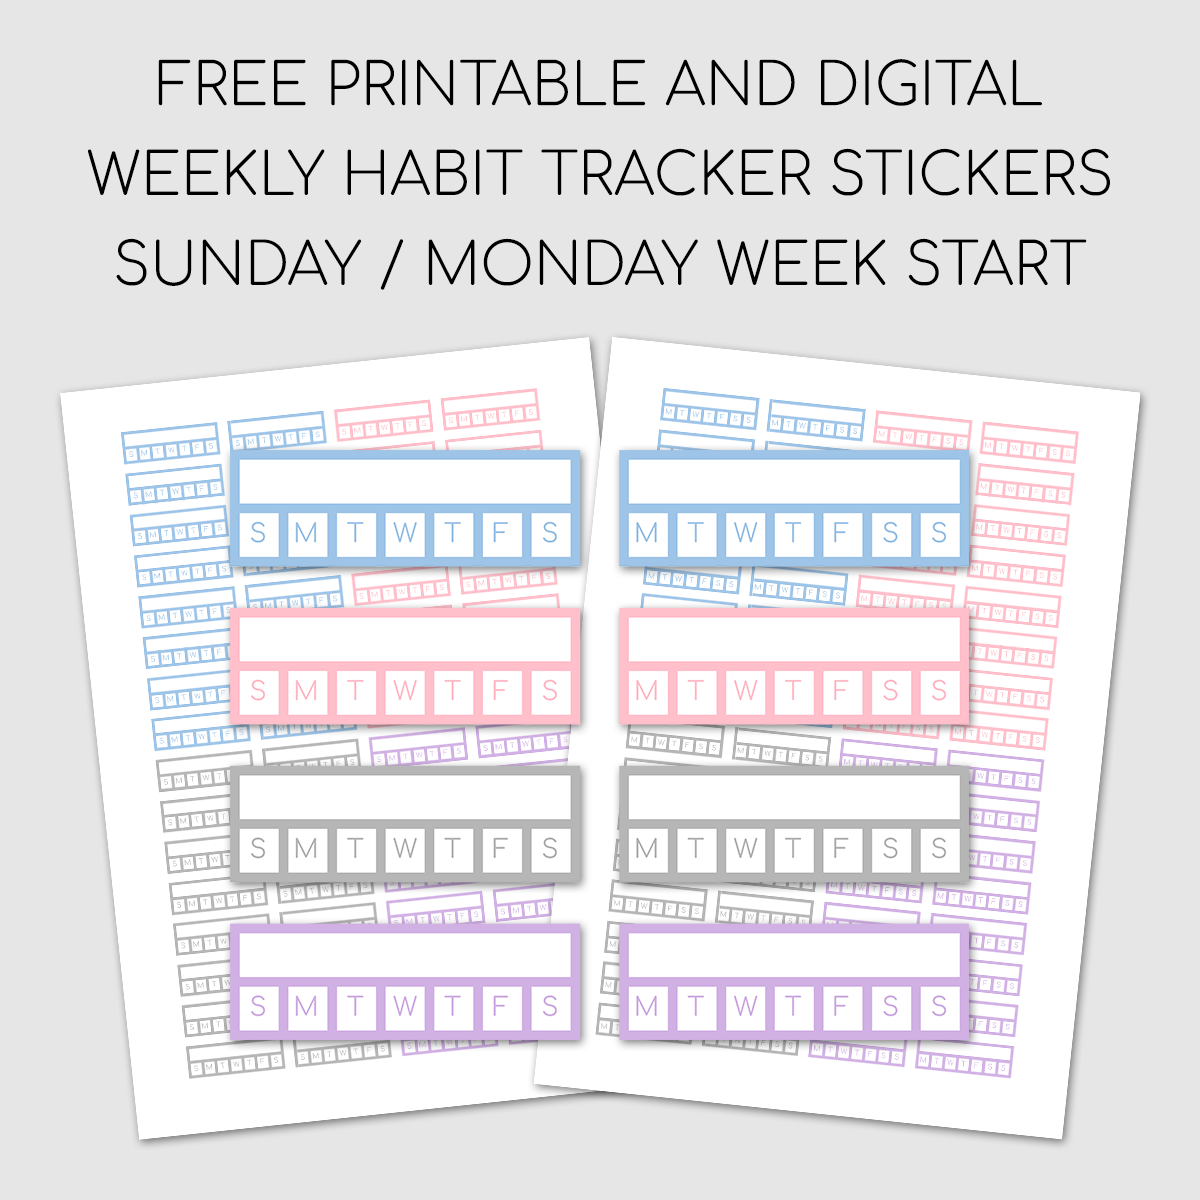 Free Printable and Digital Weekly Habit Tracker Stickers